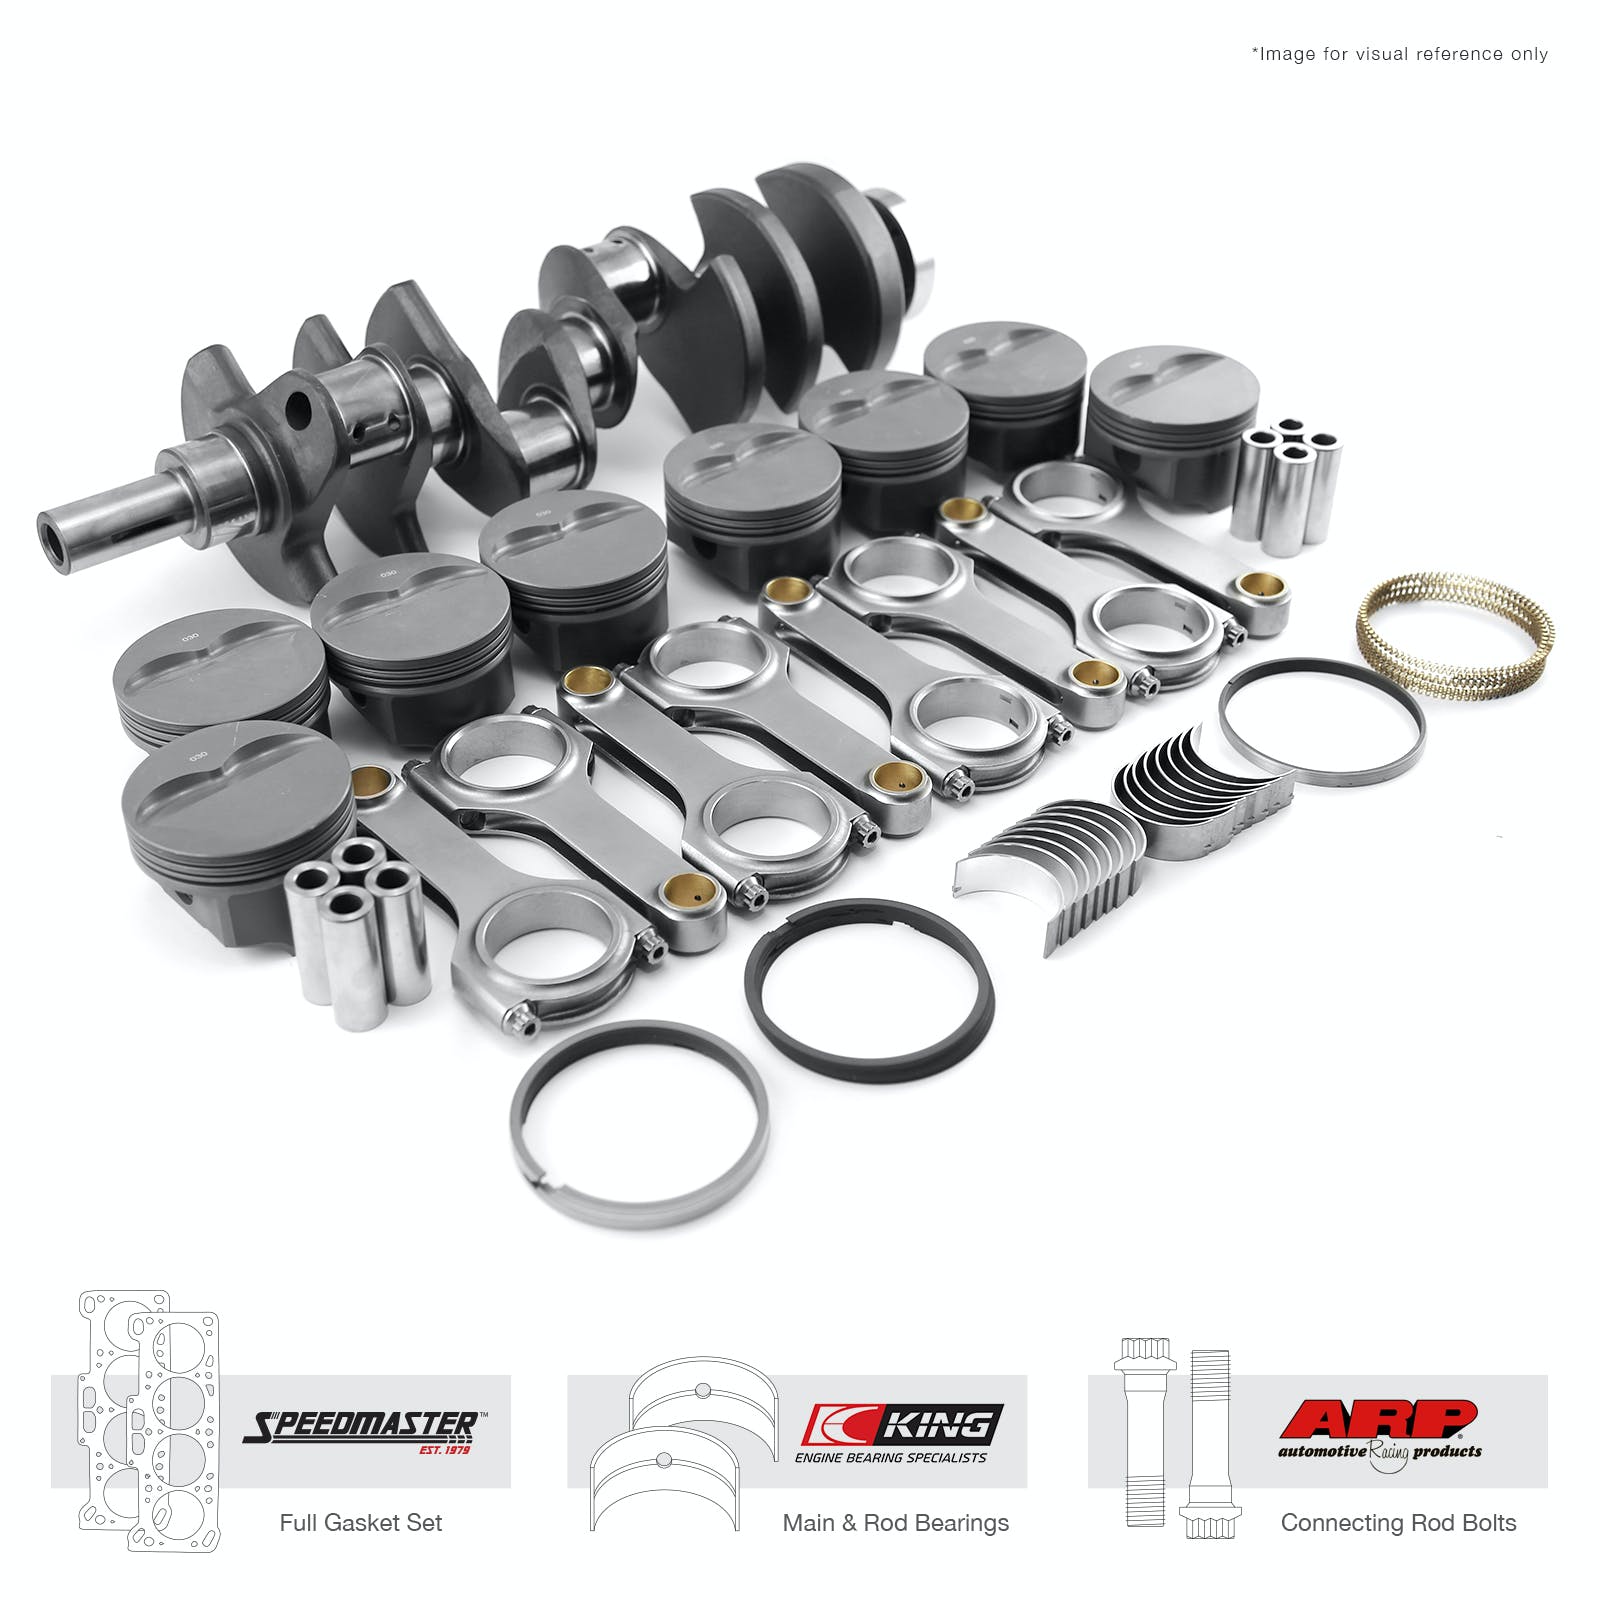 Speedmaster 1-290-013 3.750 383 ci Rotating Assembly Kit - Outlaw Series